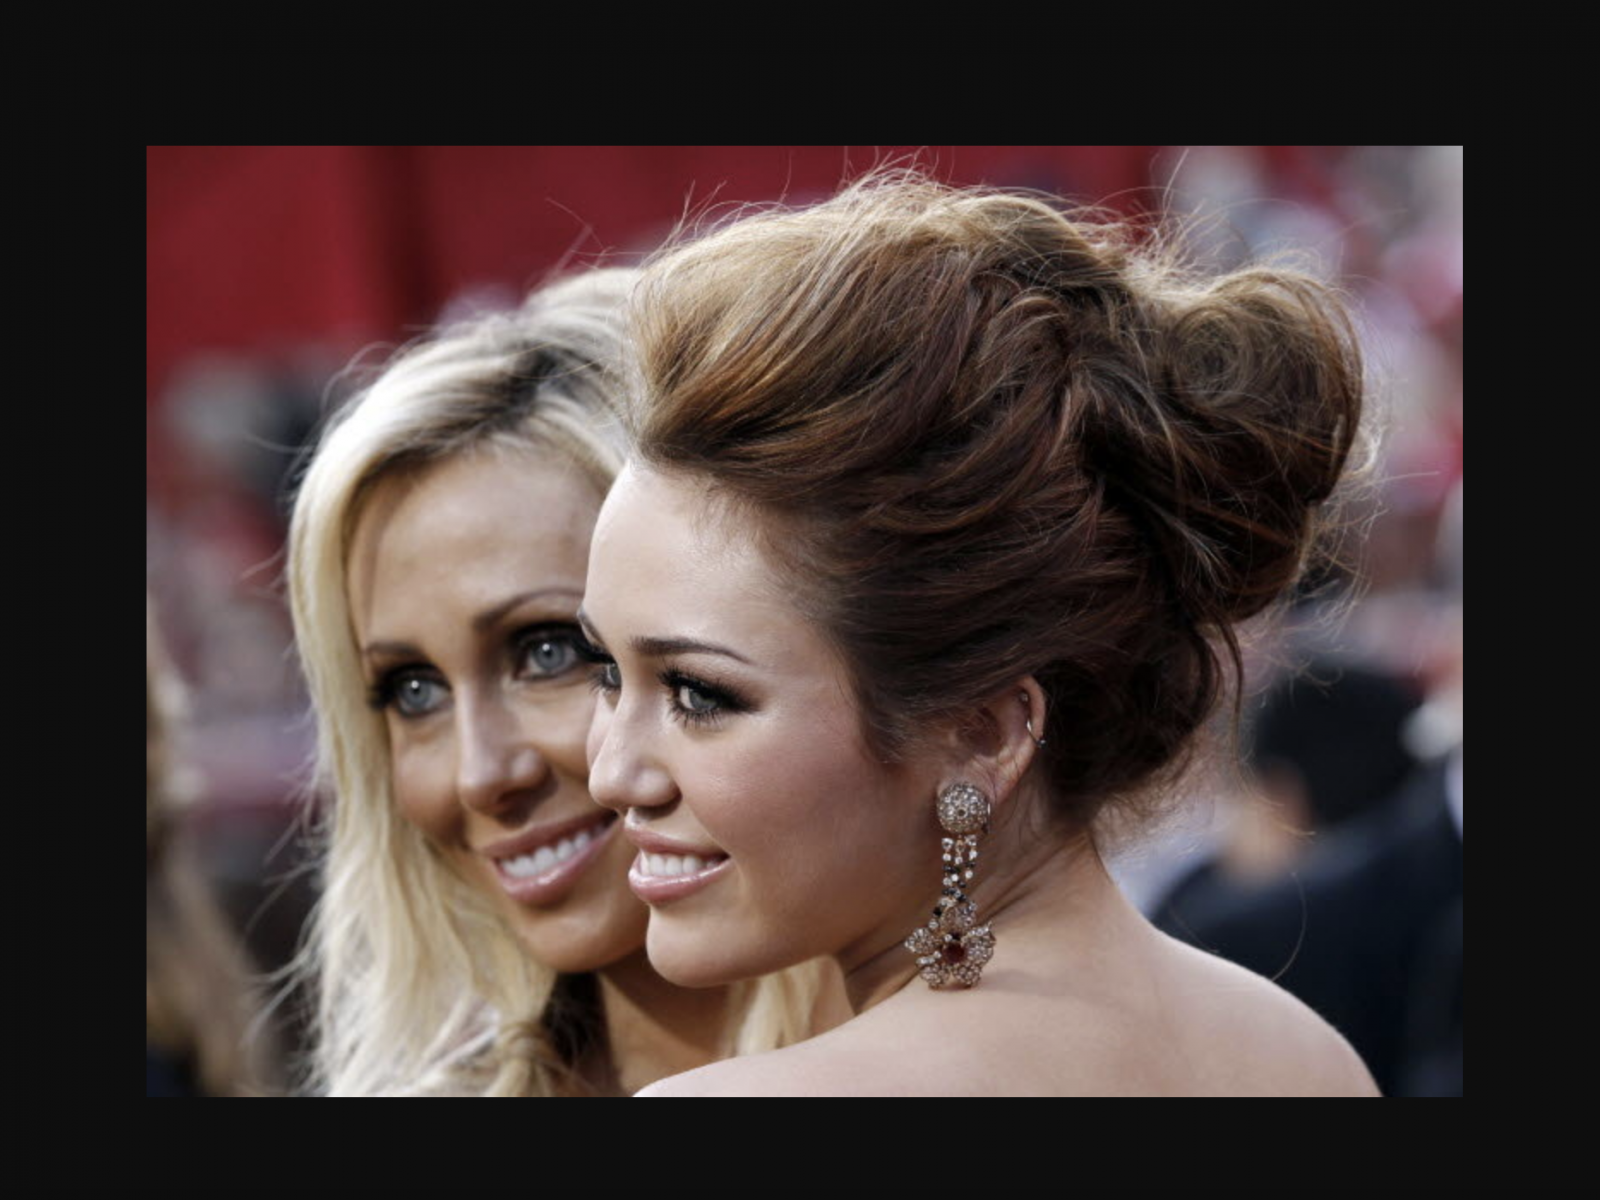 Tish and Miley Cyrus